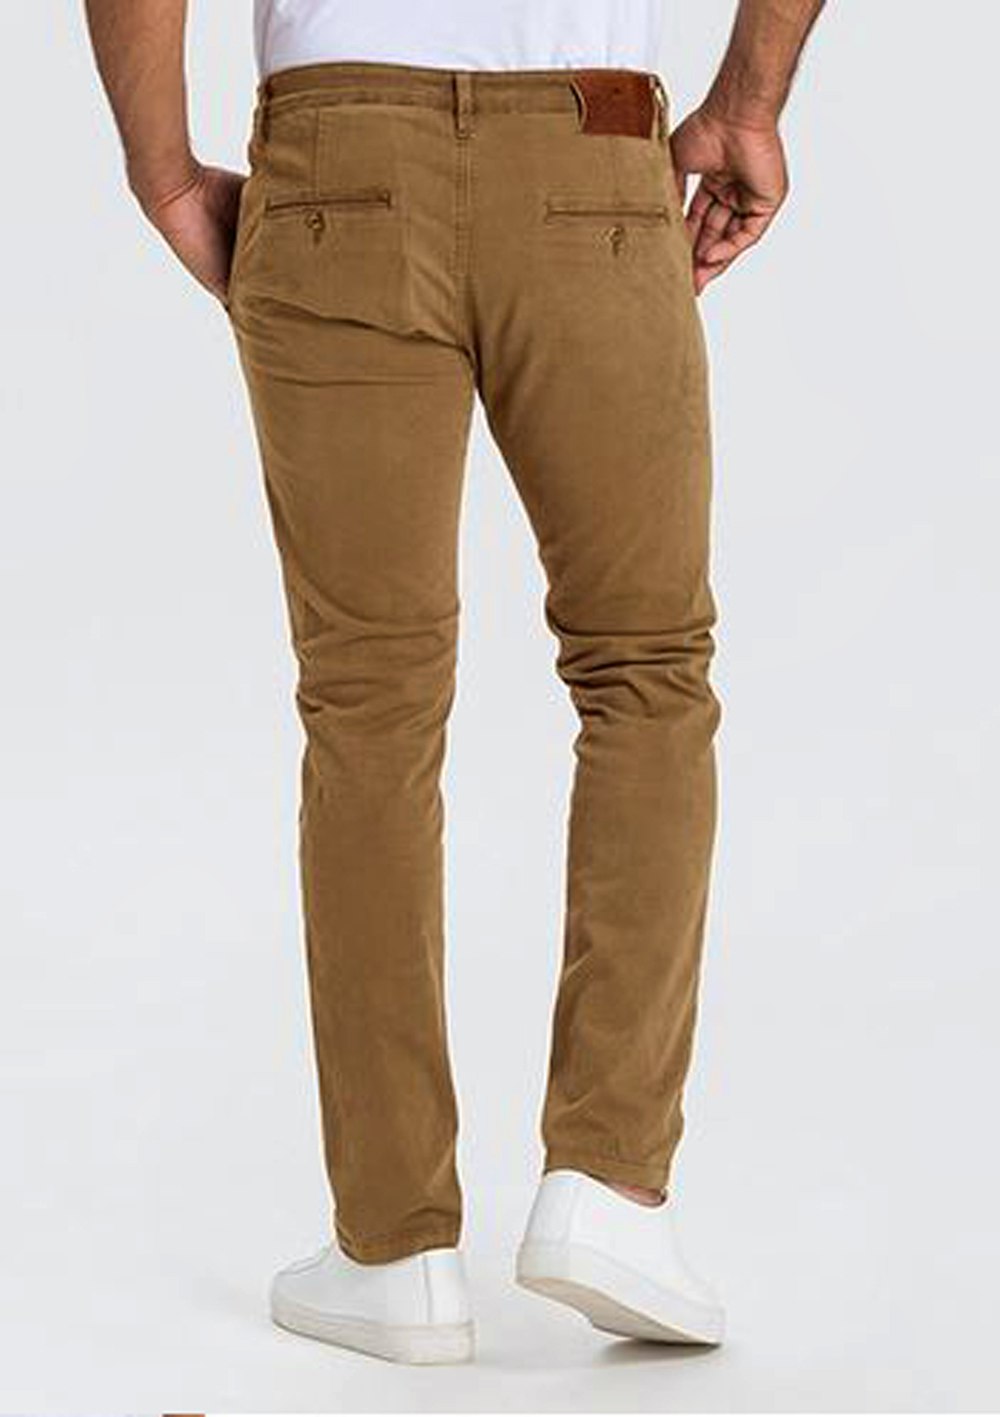 Cross Chino Hose Tapered Fit camel 